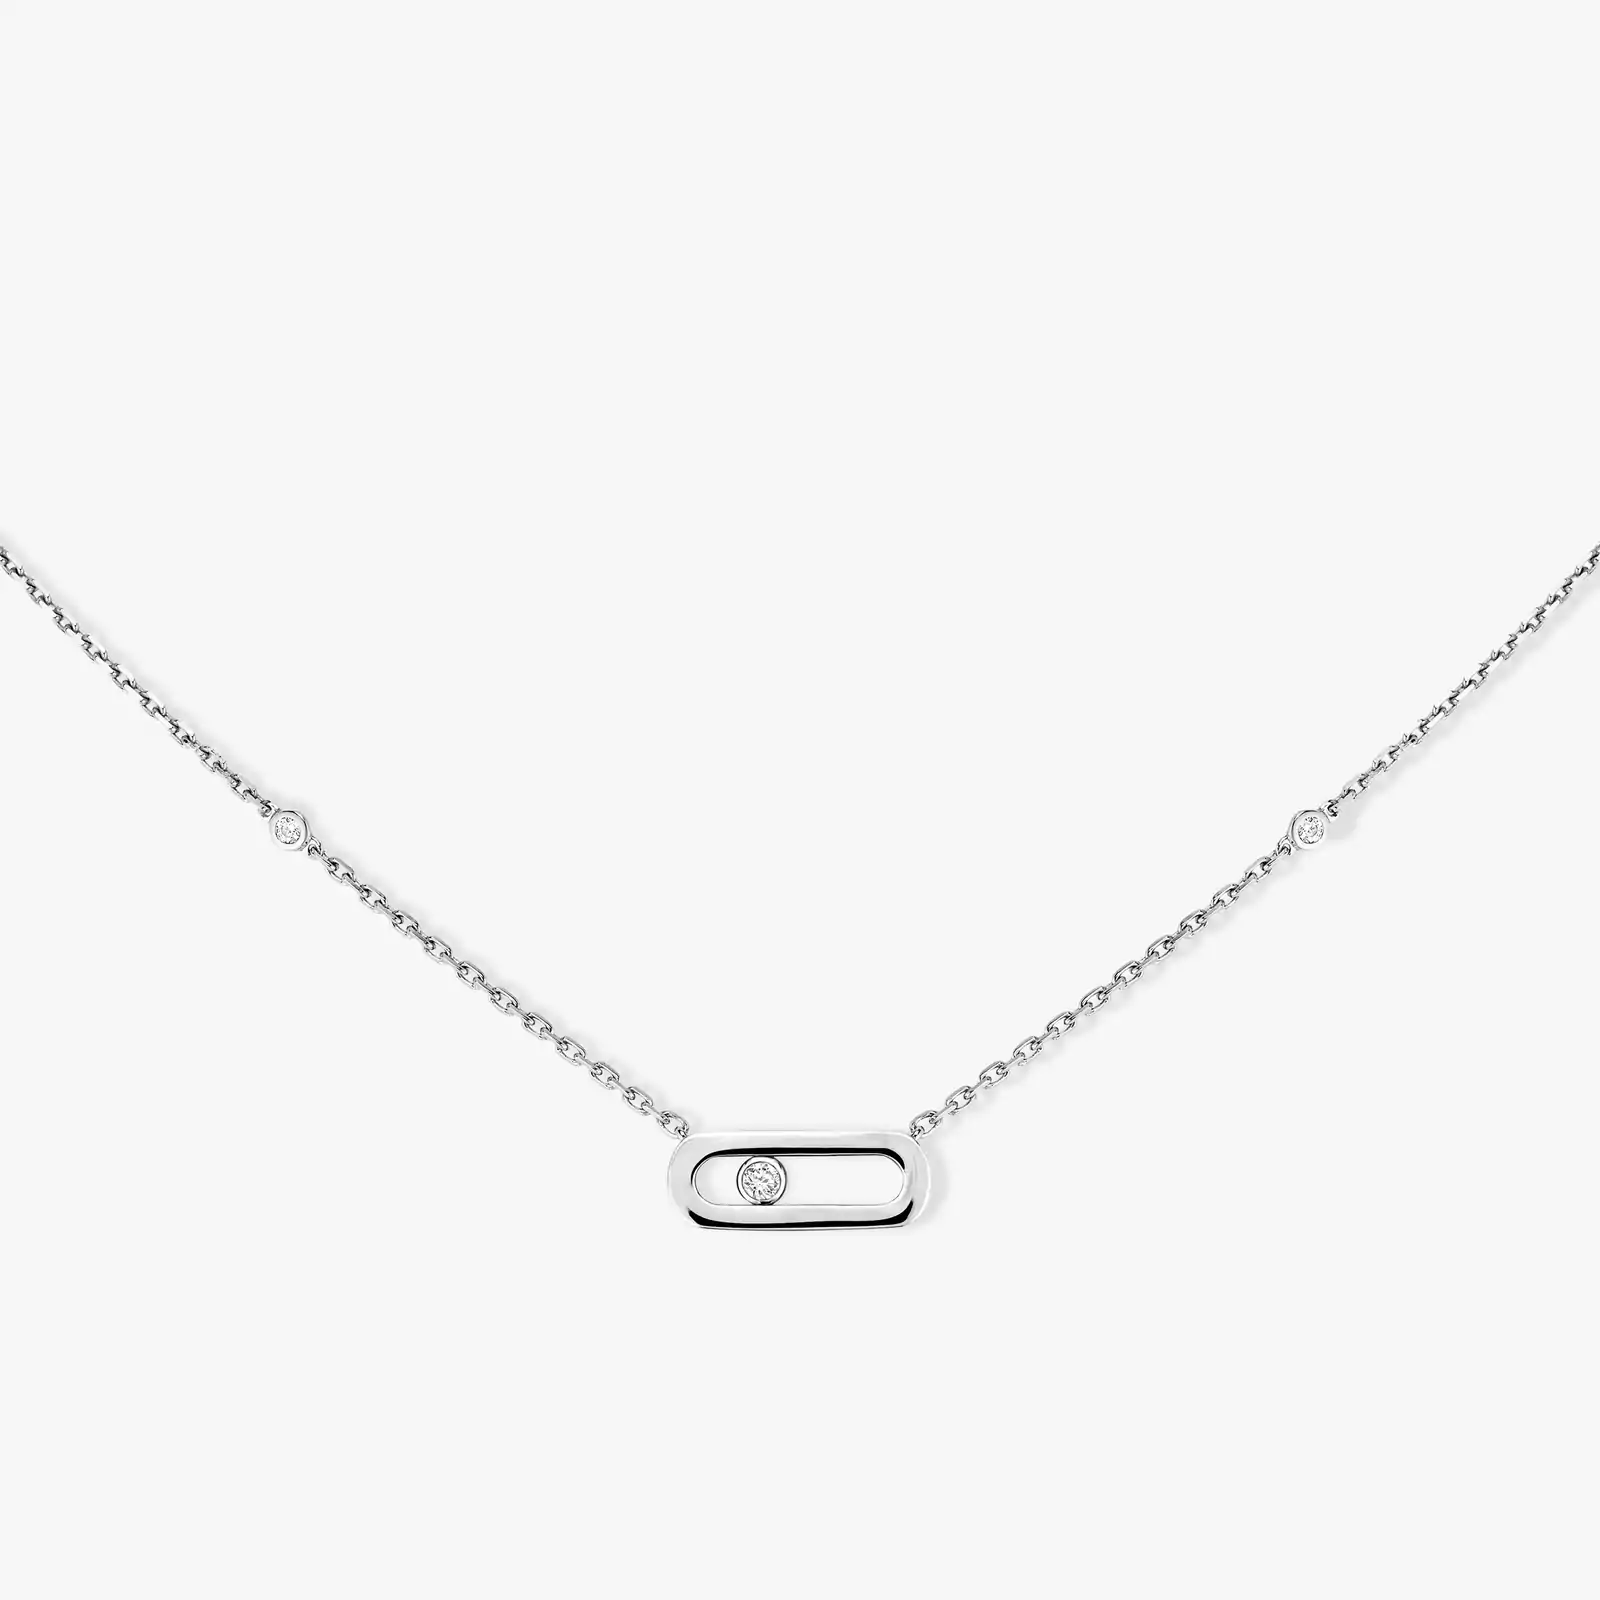 Collier Femme Or Blanc Diamant Move Uno Or 10053-WG